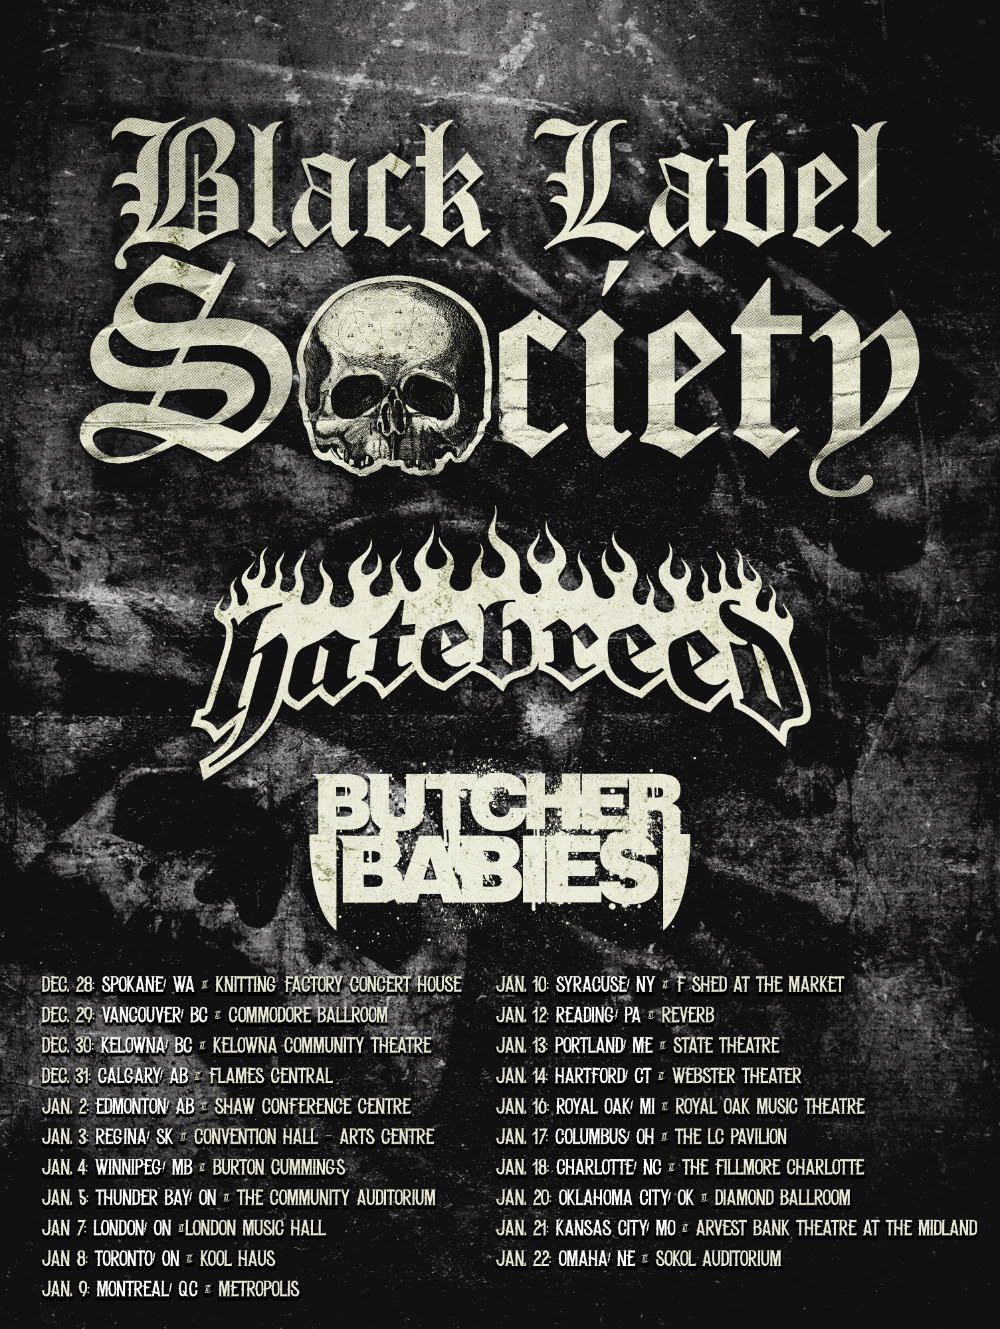 BLACK LABEL SOCIETY, HATEBREED, and BUTCHER BABIES ANNOUNCE 2014-2015 NORTH AMERICAN TOUR DATES